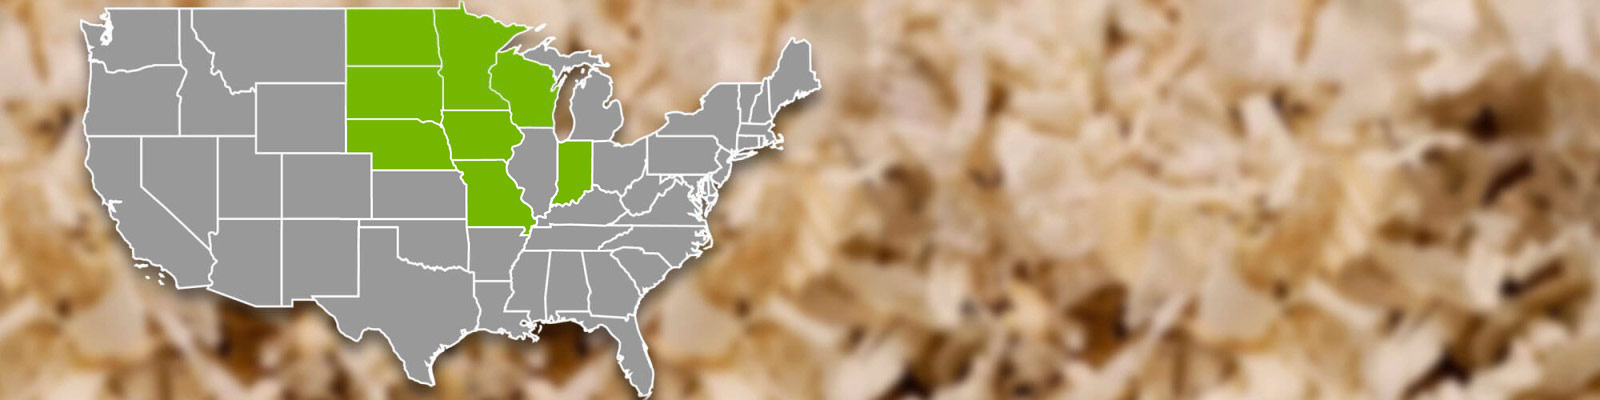 Wood shavings for animal bedding in the background with a USA map in the foreground highlighting the states of MN, IA, WI, ND and SD